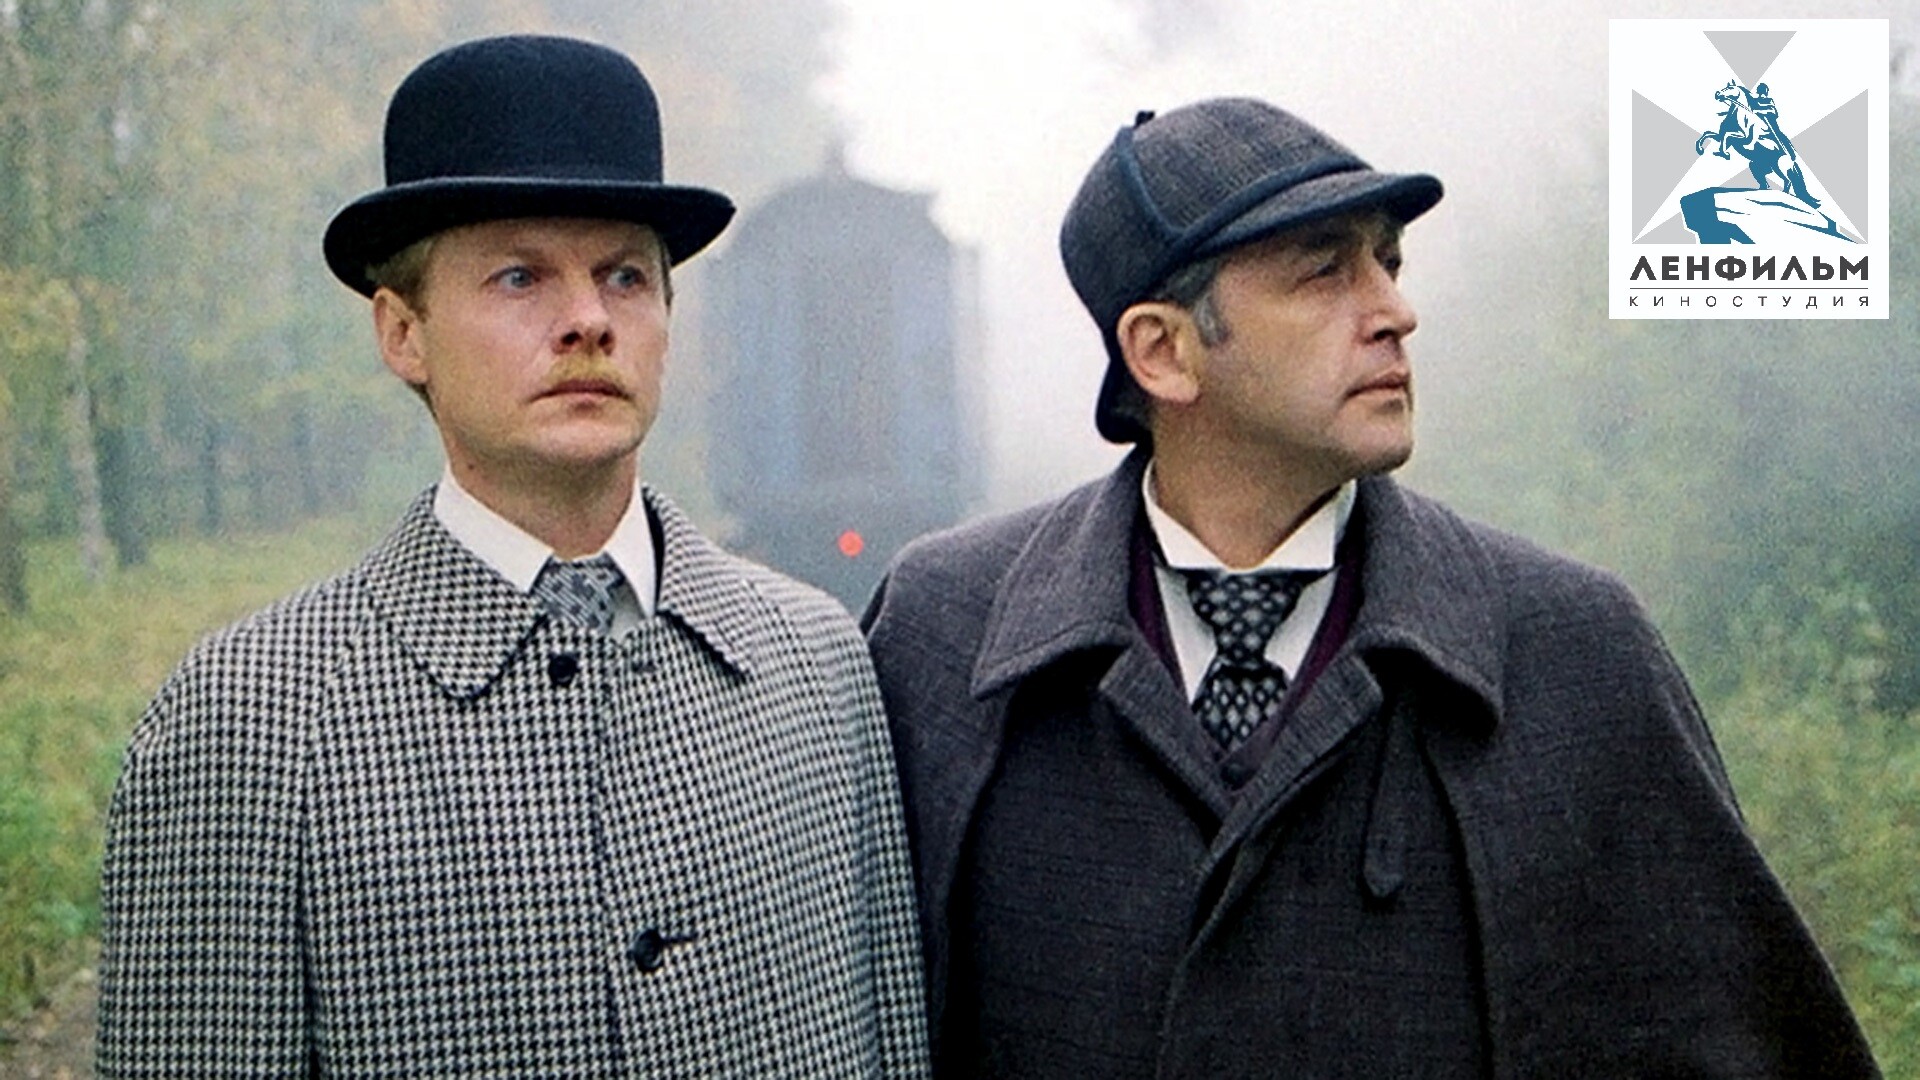 A still from ‘The Adventures of Sherlock Holmes & Dr. Watson’